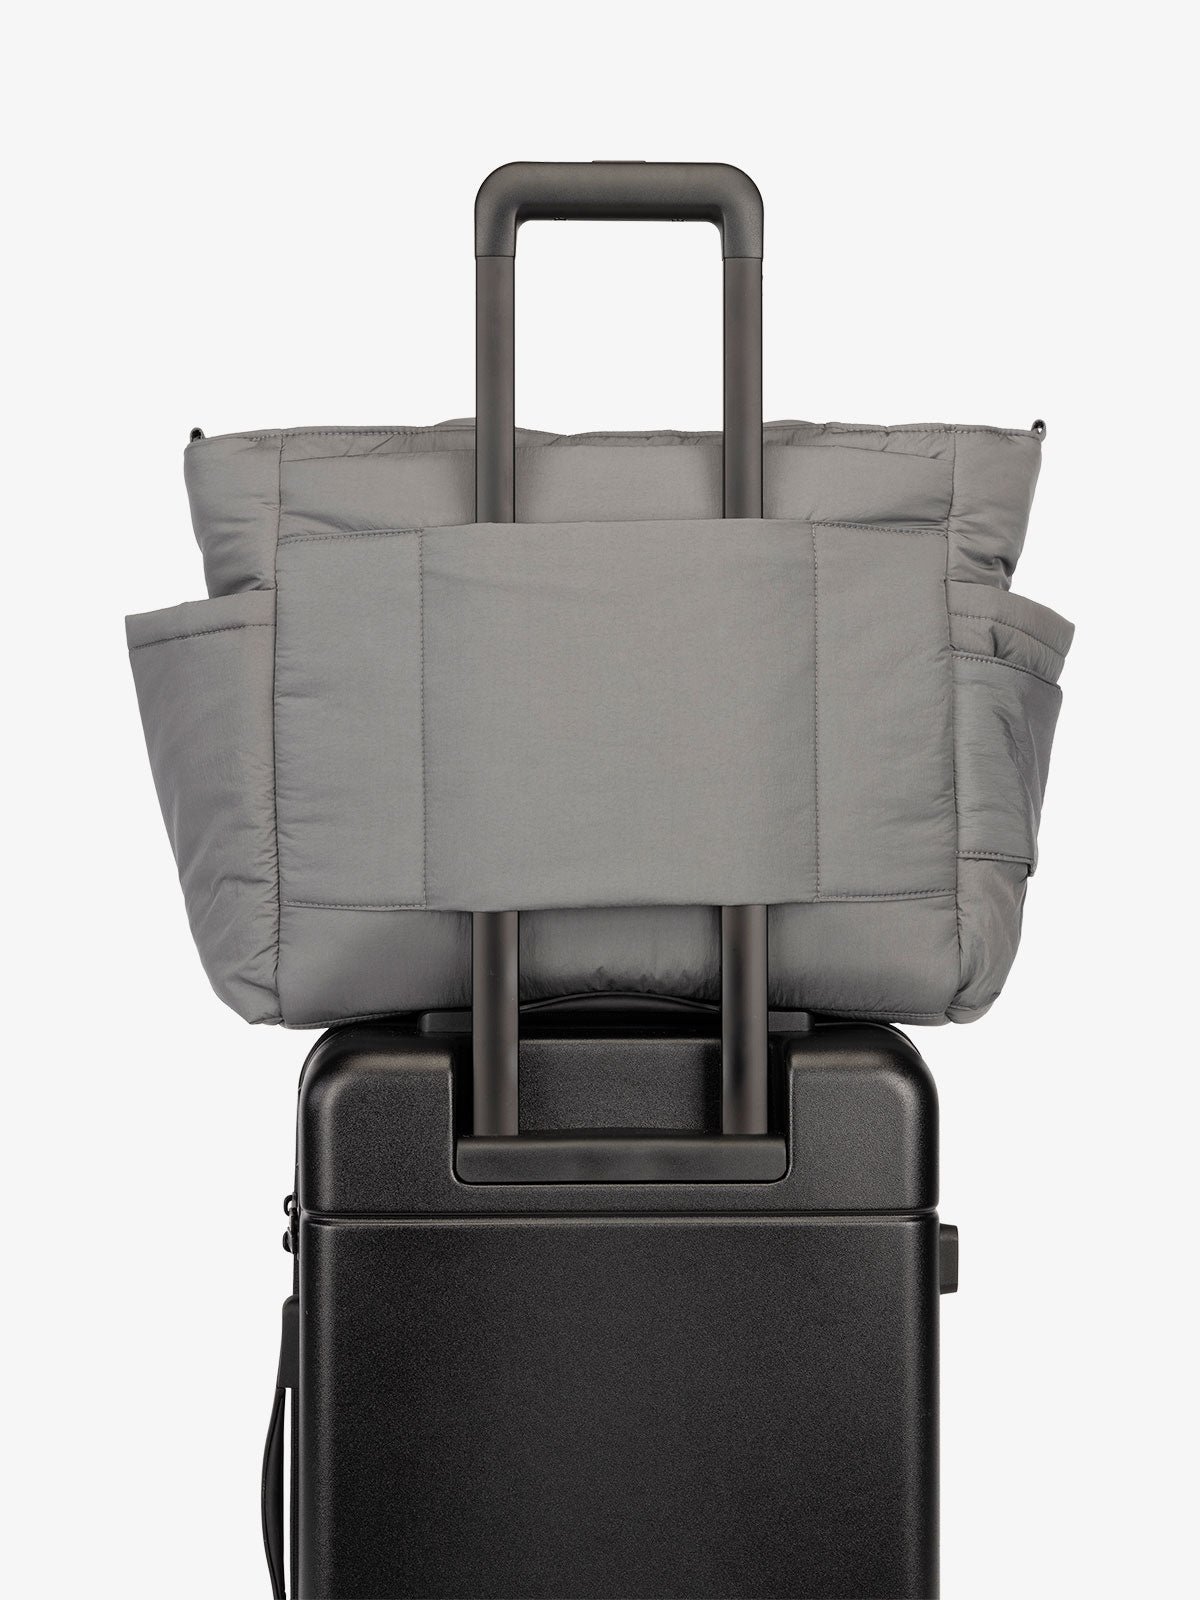 CALPAK Diaper Tote Bag with Laptop Sleeve featuring luggage trolley sleeve with back pocket in slate gray